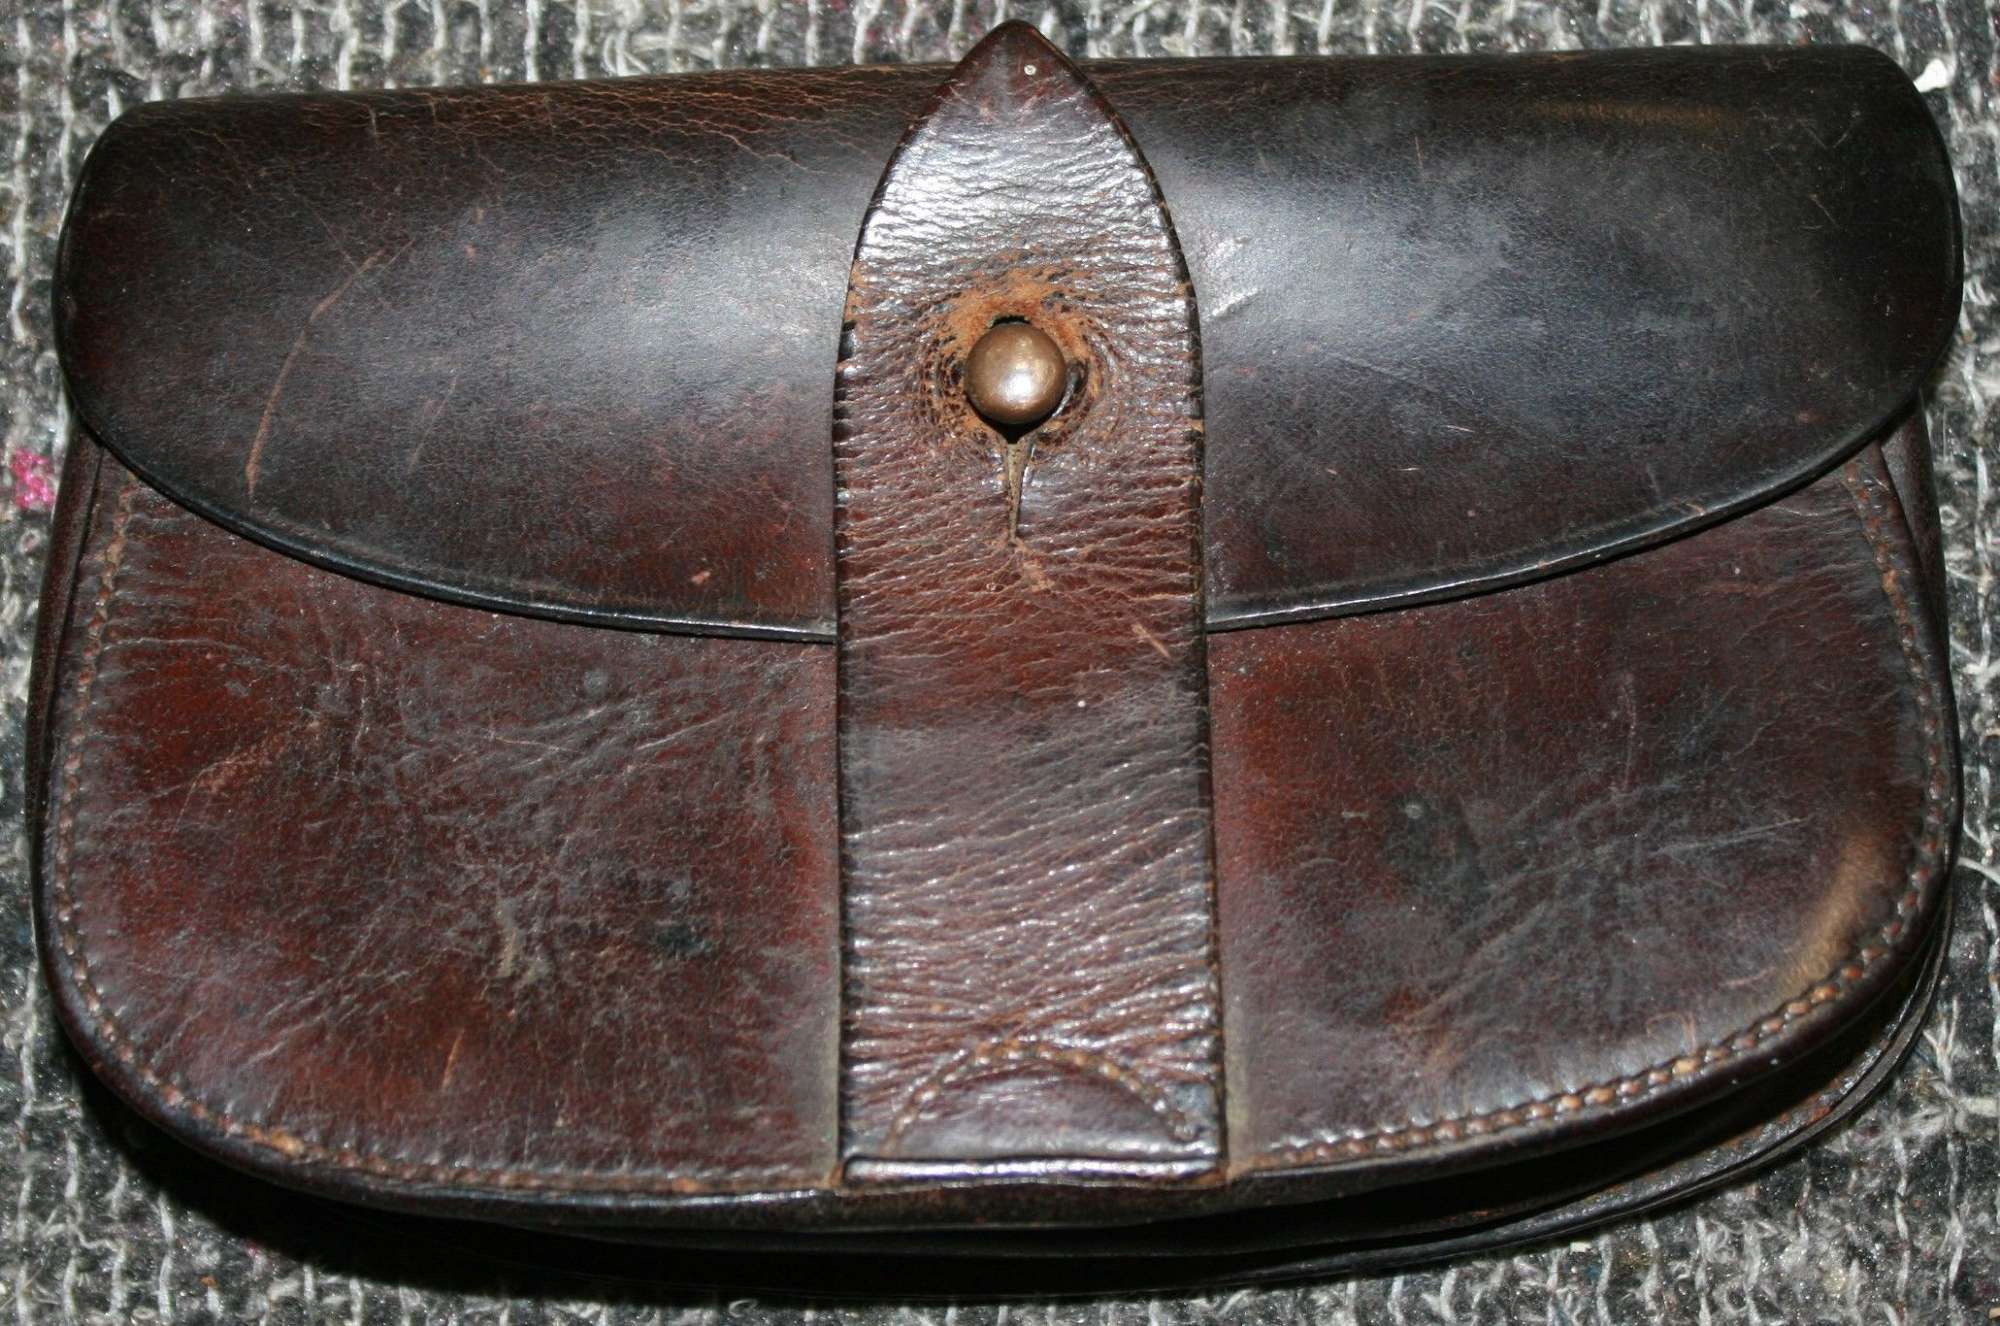 A WWI PERIOD OFFICERS SAM BROWN PISTOL AMMO POUCH